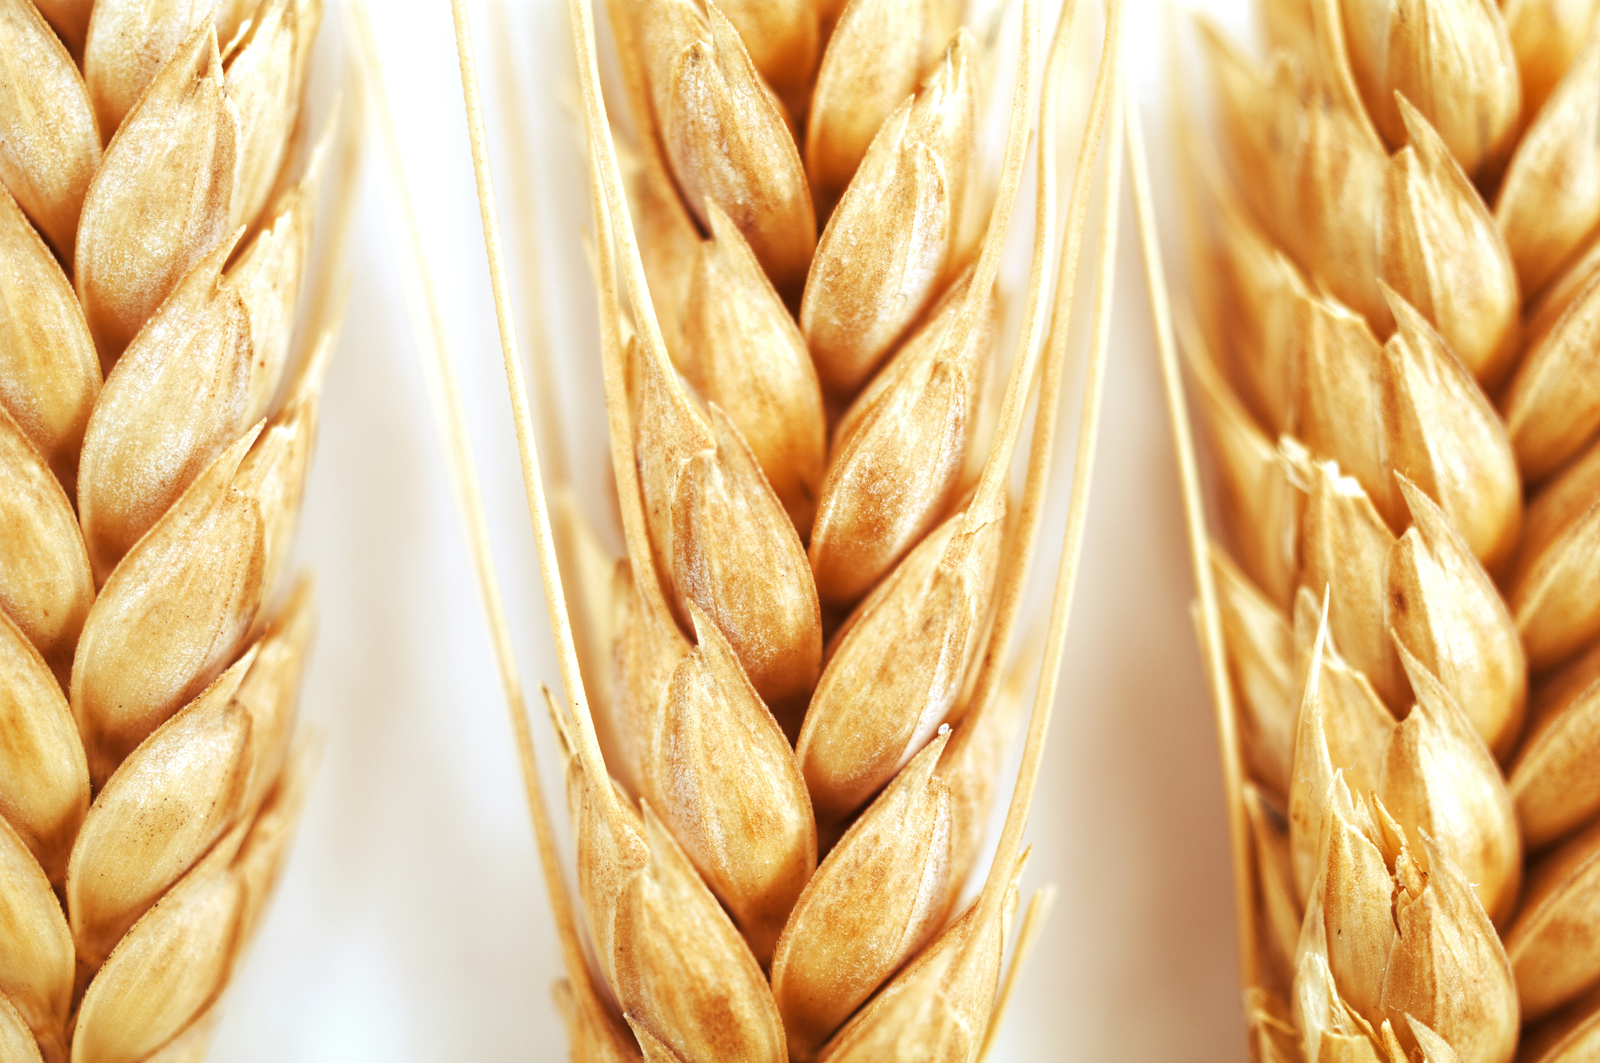 NSP variability found in wheat for poultry feed